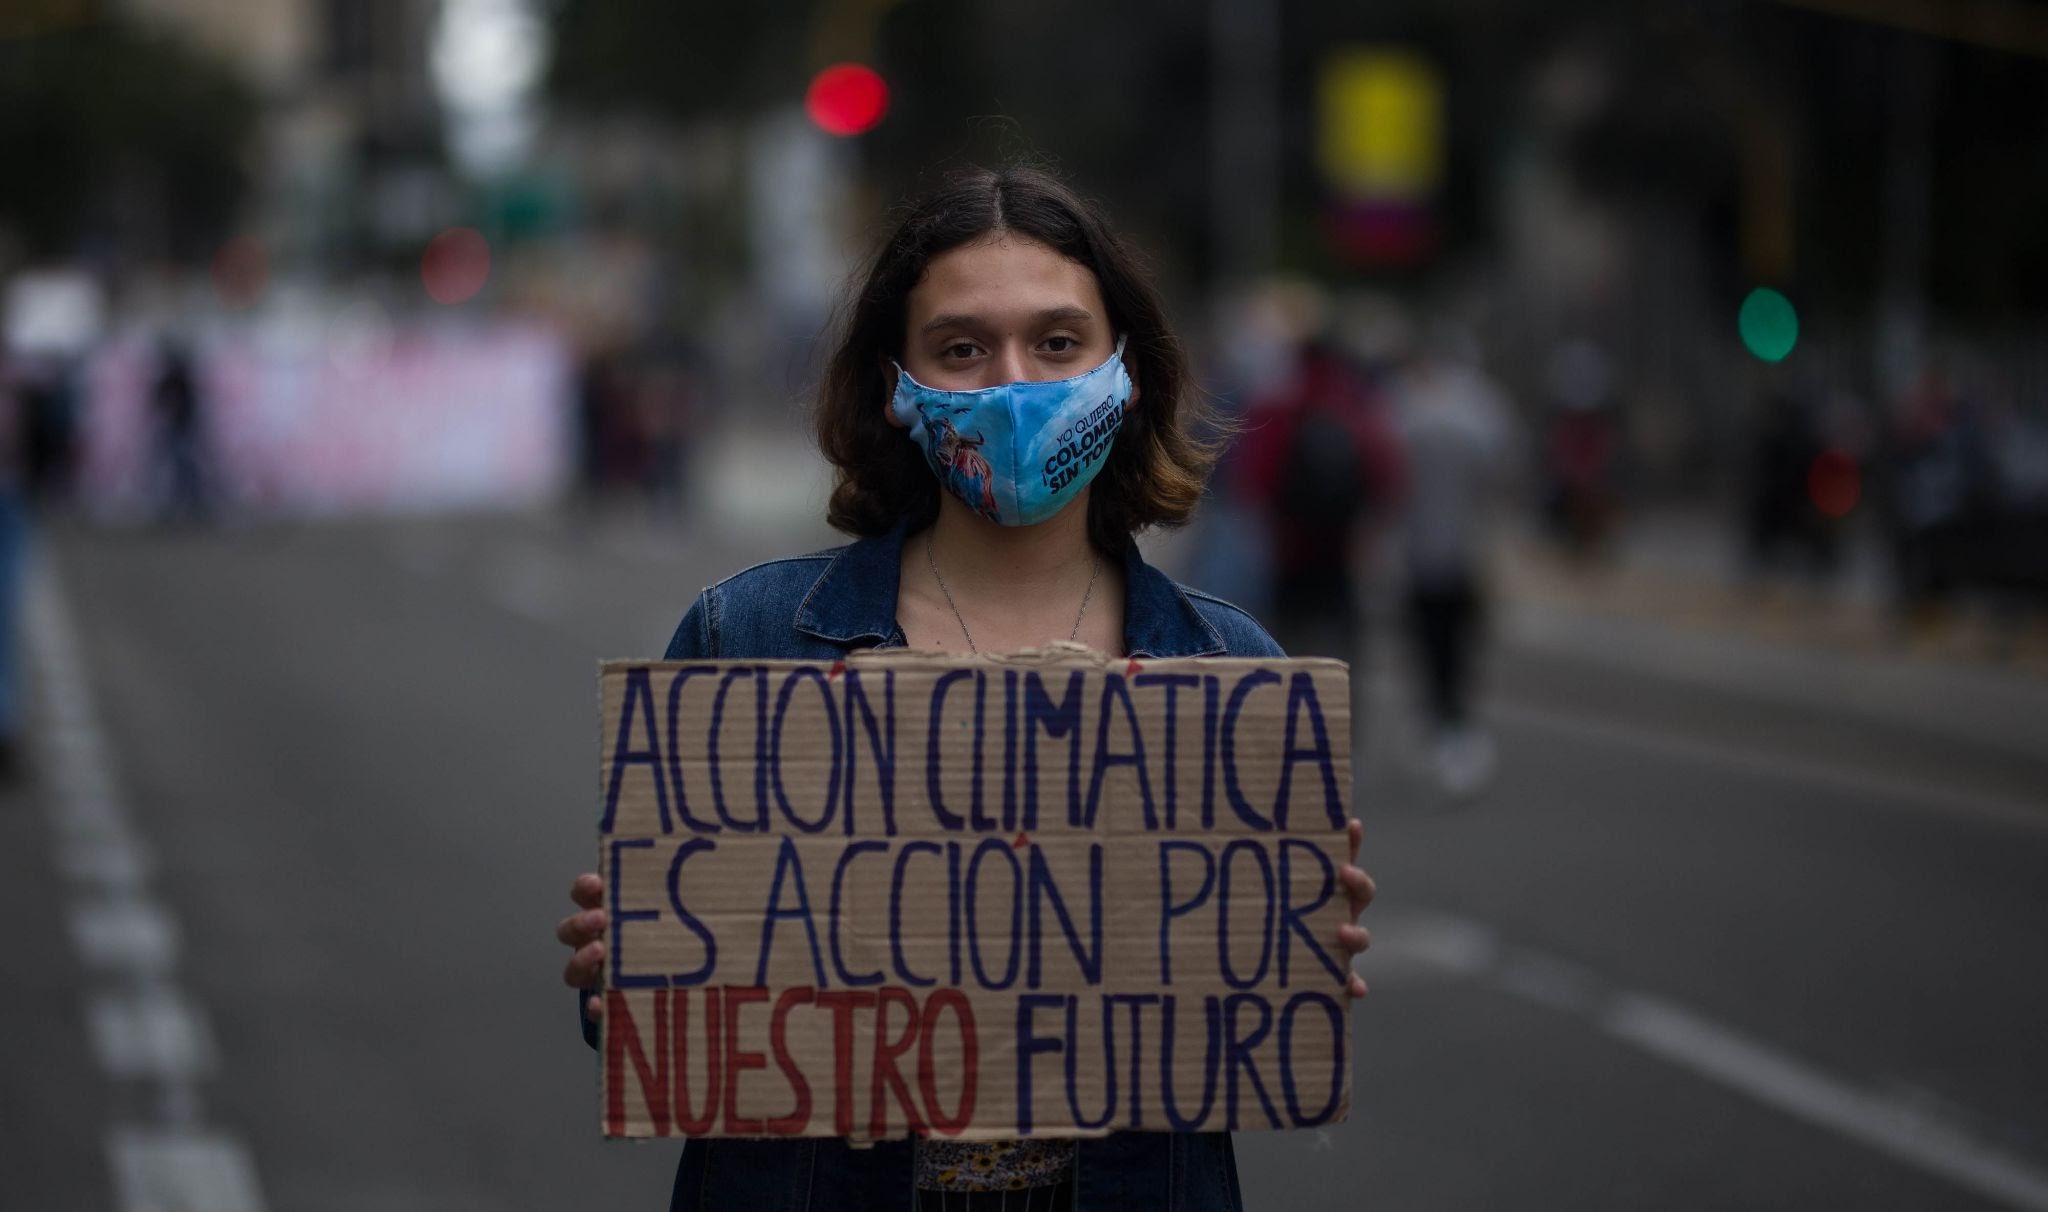 A young woman wearing a face mask holds a sign while stood in the road